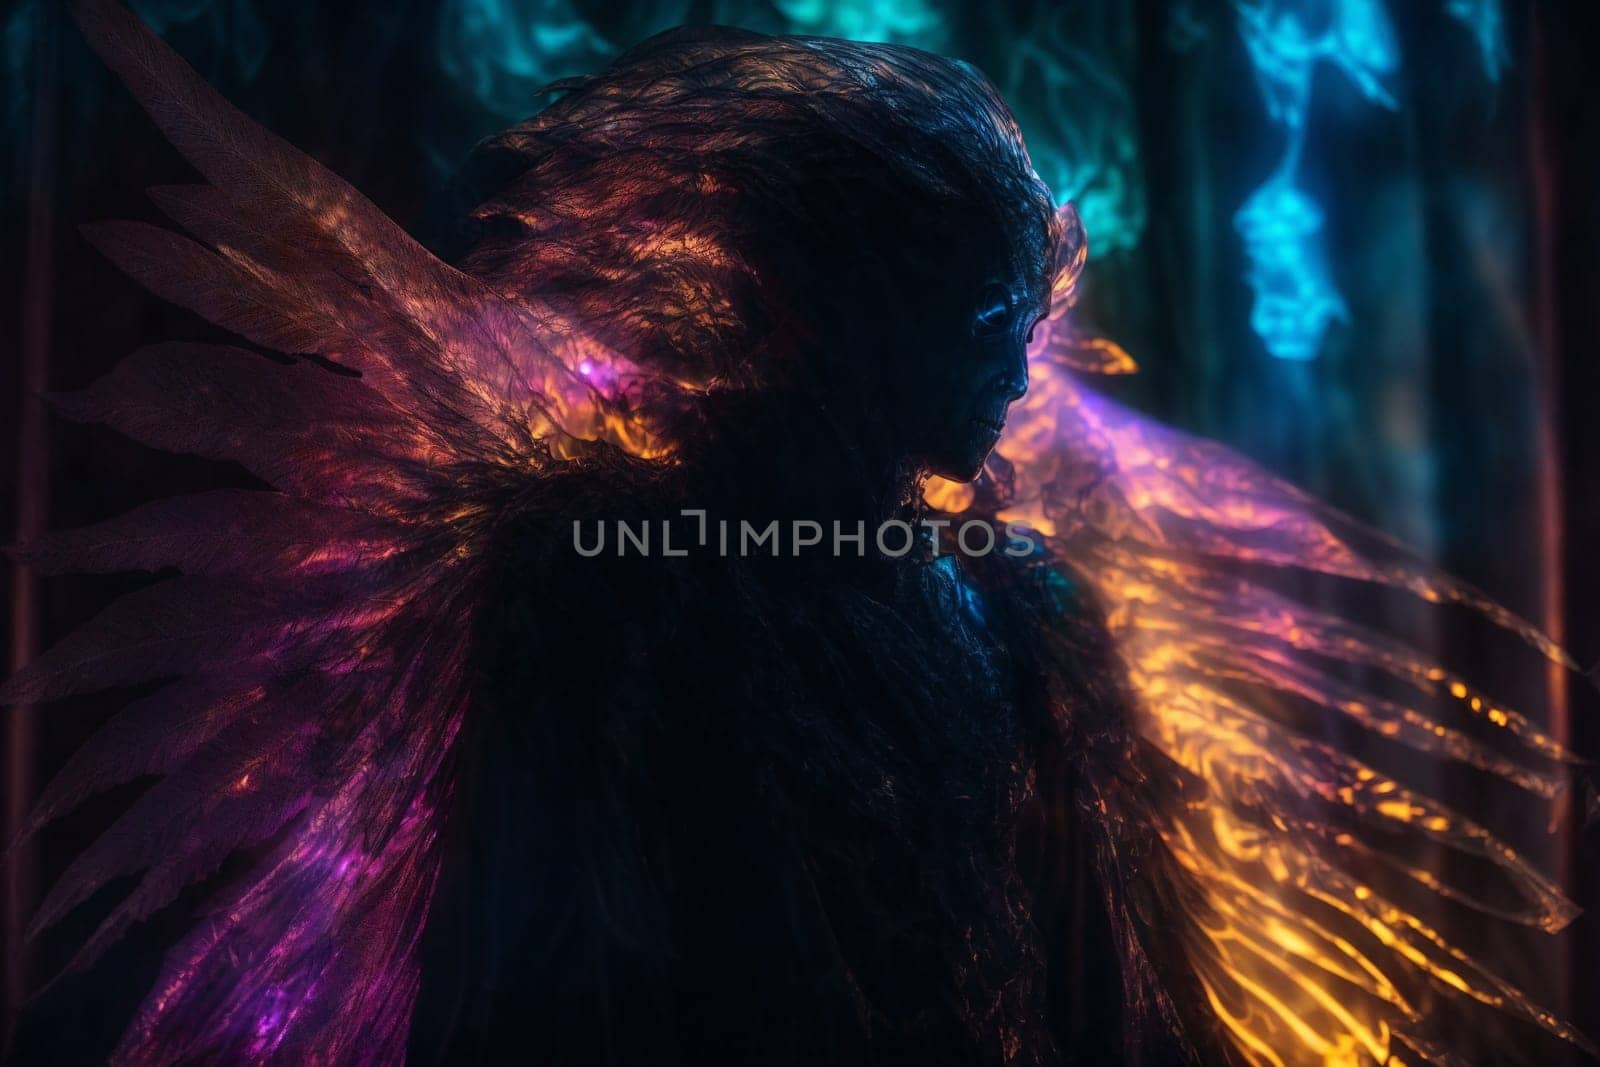 A photo of a person with wings standing in a dark room, illuminated by a single light source.